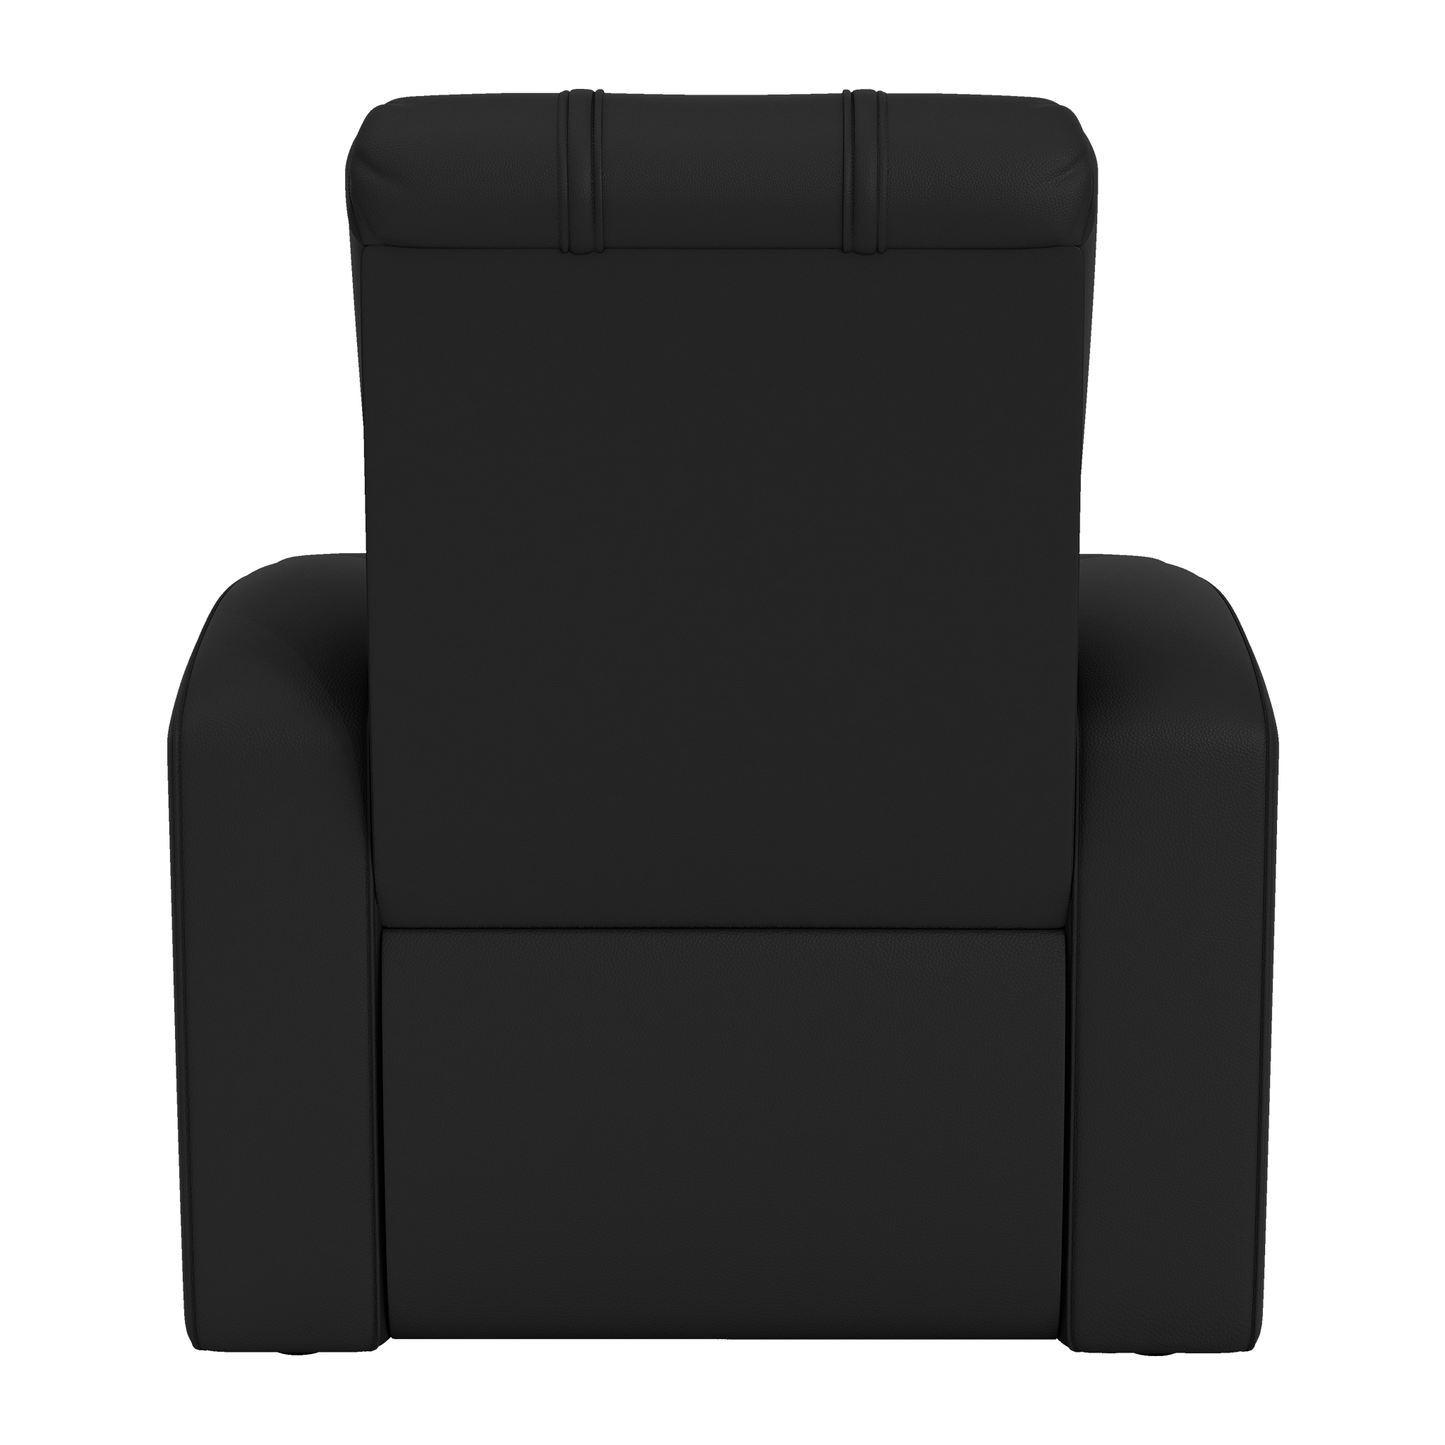 Relax Home Theater Recliner with Nashville SC Secondary Logo